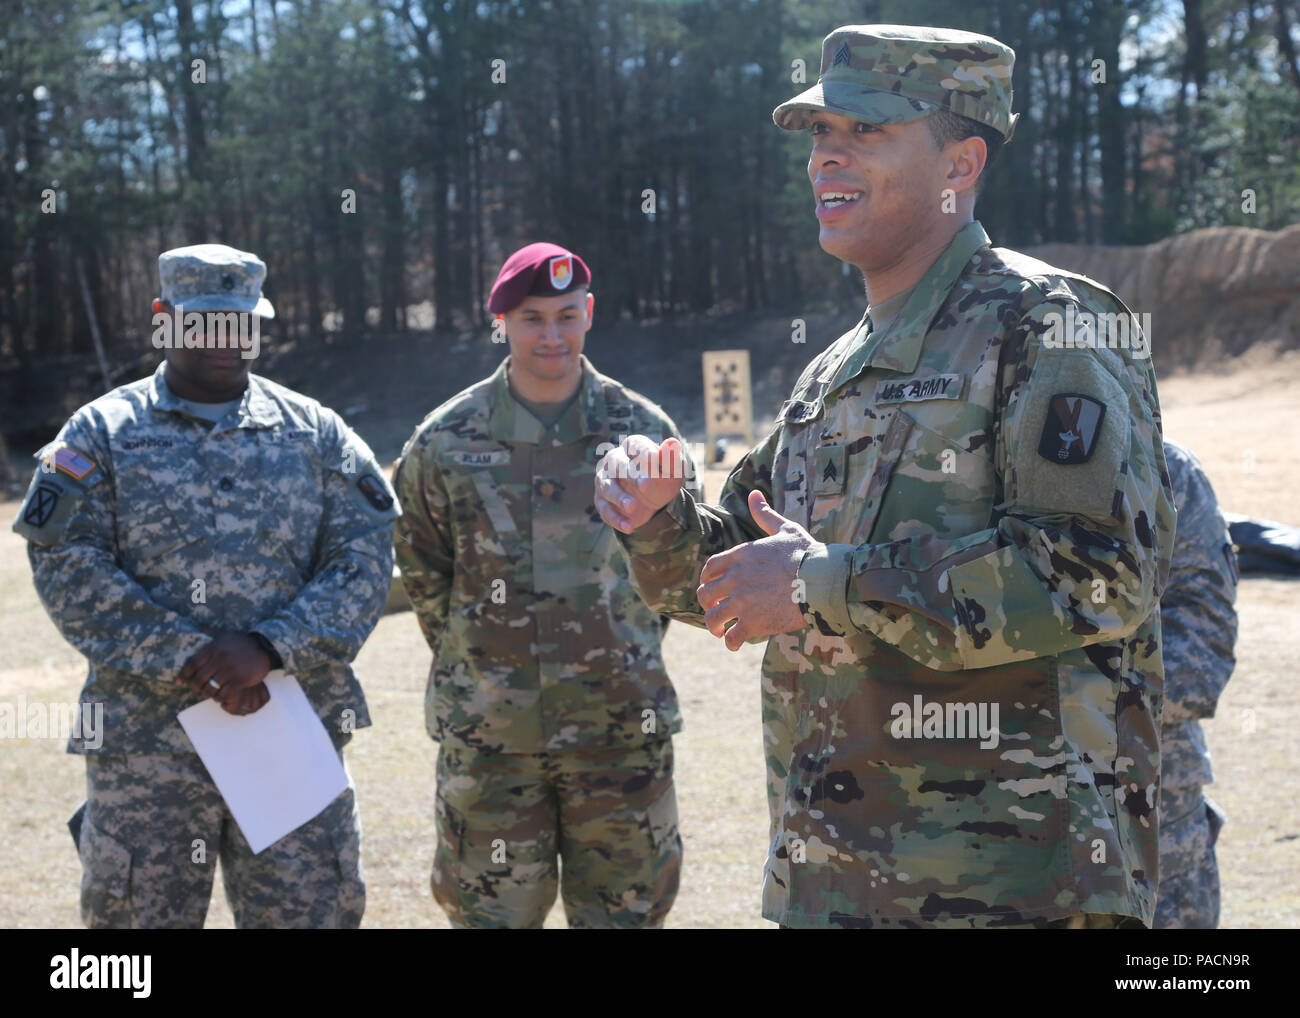 U.S. Army Sgt. Samuel Nobles, assigned to 55th Signal Company (Combat Camera), speaks on his promotion at Fort George G. Meade, Md., March 2, 2016. The promotion from Specialist to Sergeant marks the responsibility instilled into the new noncommissioned officer. ( U.S. Army photo by Spc. Alyssa Madero/Released) Stock Photo